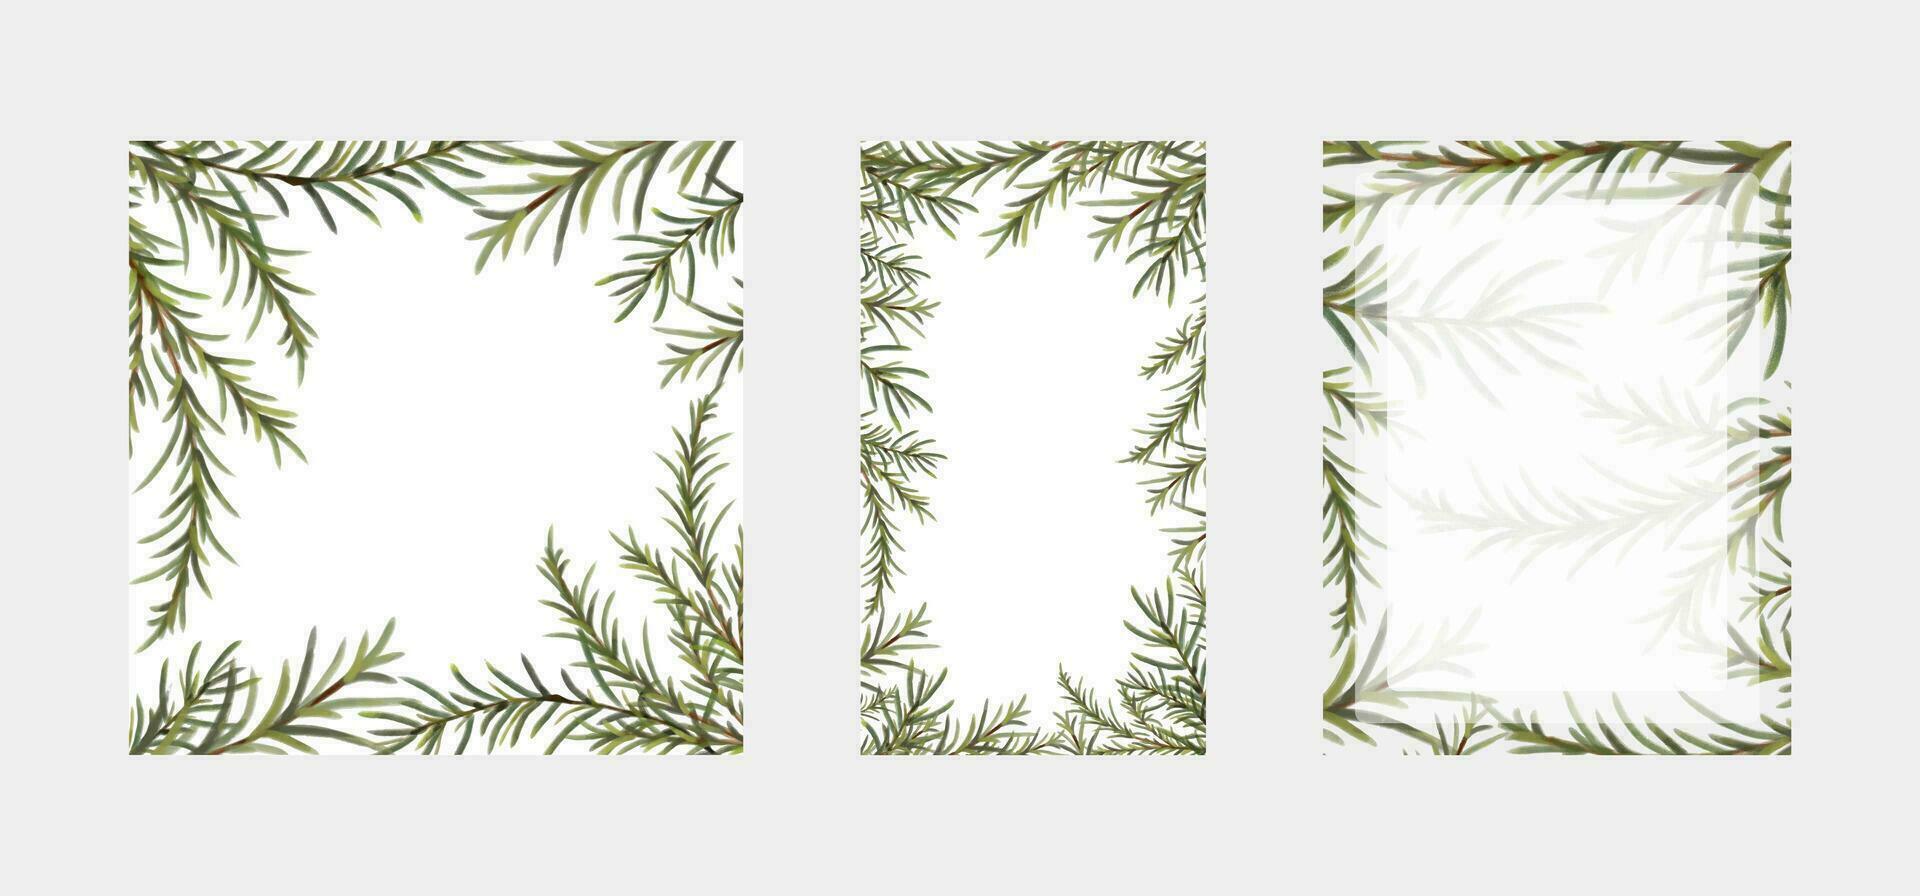 Set of border frames of hand drawn and hand painted watercolor coniferous evergreen tree branches. Square, rectangle and stories background templates for social media. vector